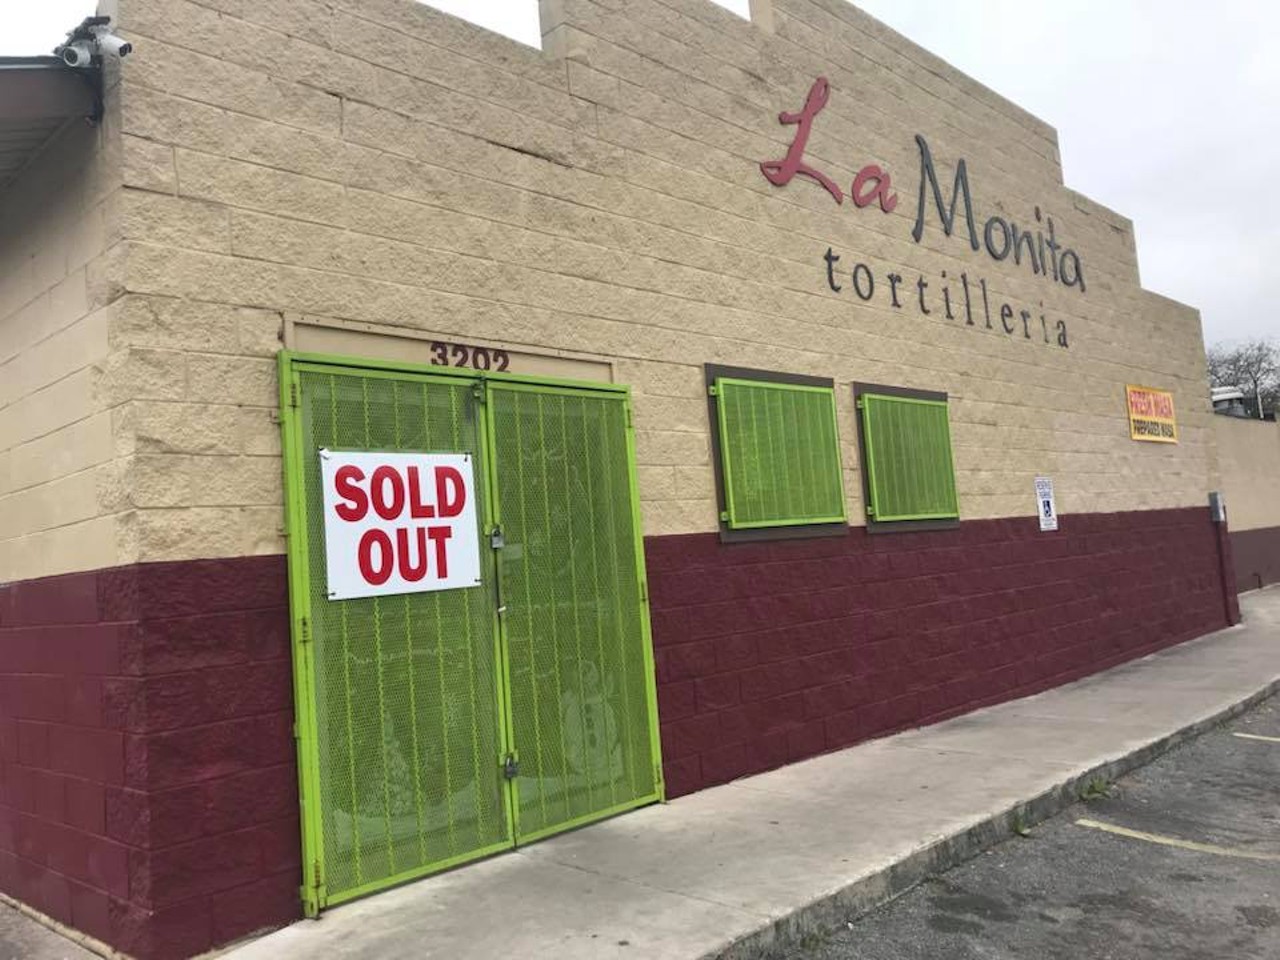 La Monita Tortilleria
3202 Guadalupe St, (210) 432-0332, facebook.com
Located in the heart of the West Side, La Monita sells their masa ready to go, as well as corn and flour tortillas. They also have some delicious AF barbacoa, in case you need any ideas on what to pair with your dozens of tortillas.
Photo via Facebook / La Monita Tortilleria